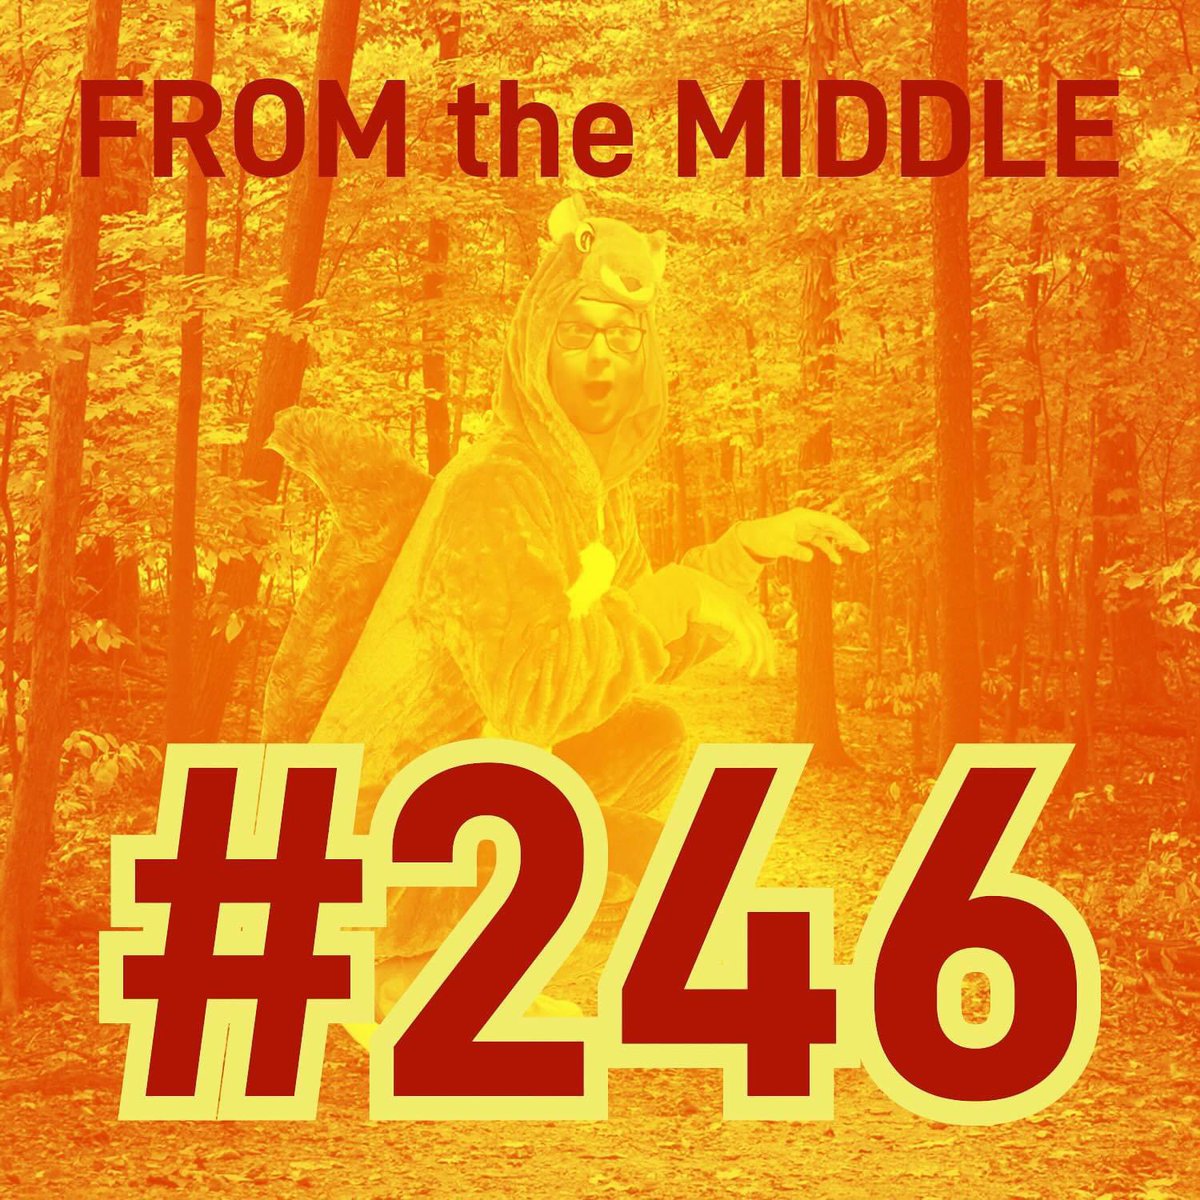 📺 NEW EPISODE ALERT 🐿️ Ep. #246 “Squirrel Suits, Sports Stuff, & Solid Streams” is out everywhere you find podcasts & YouTube! 📺 Check our bio to listen! 🎧 Member of @OddPodsMedia w/ ad by @BFYTWpodcast 🎙️